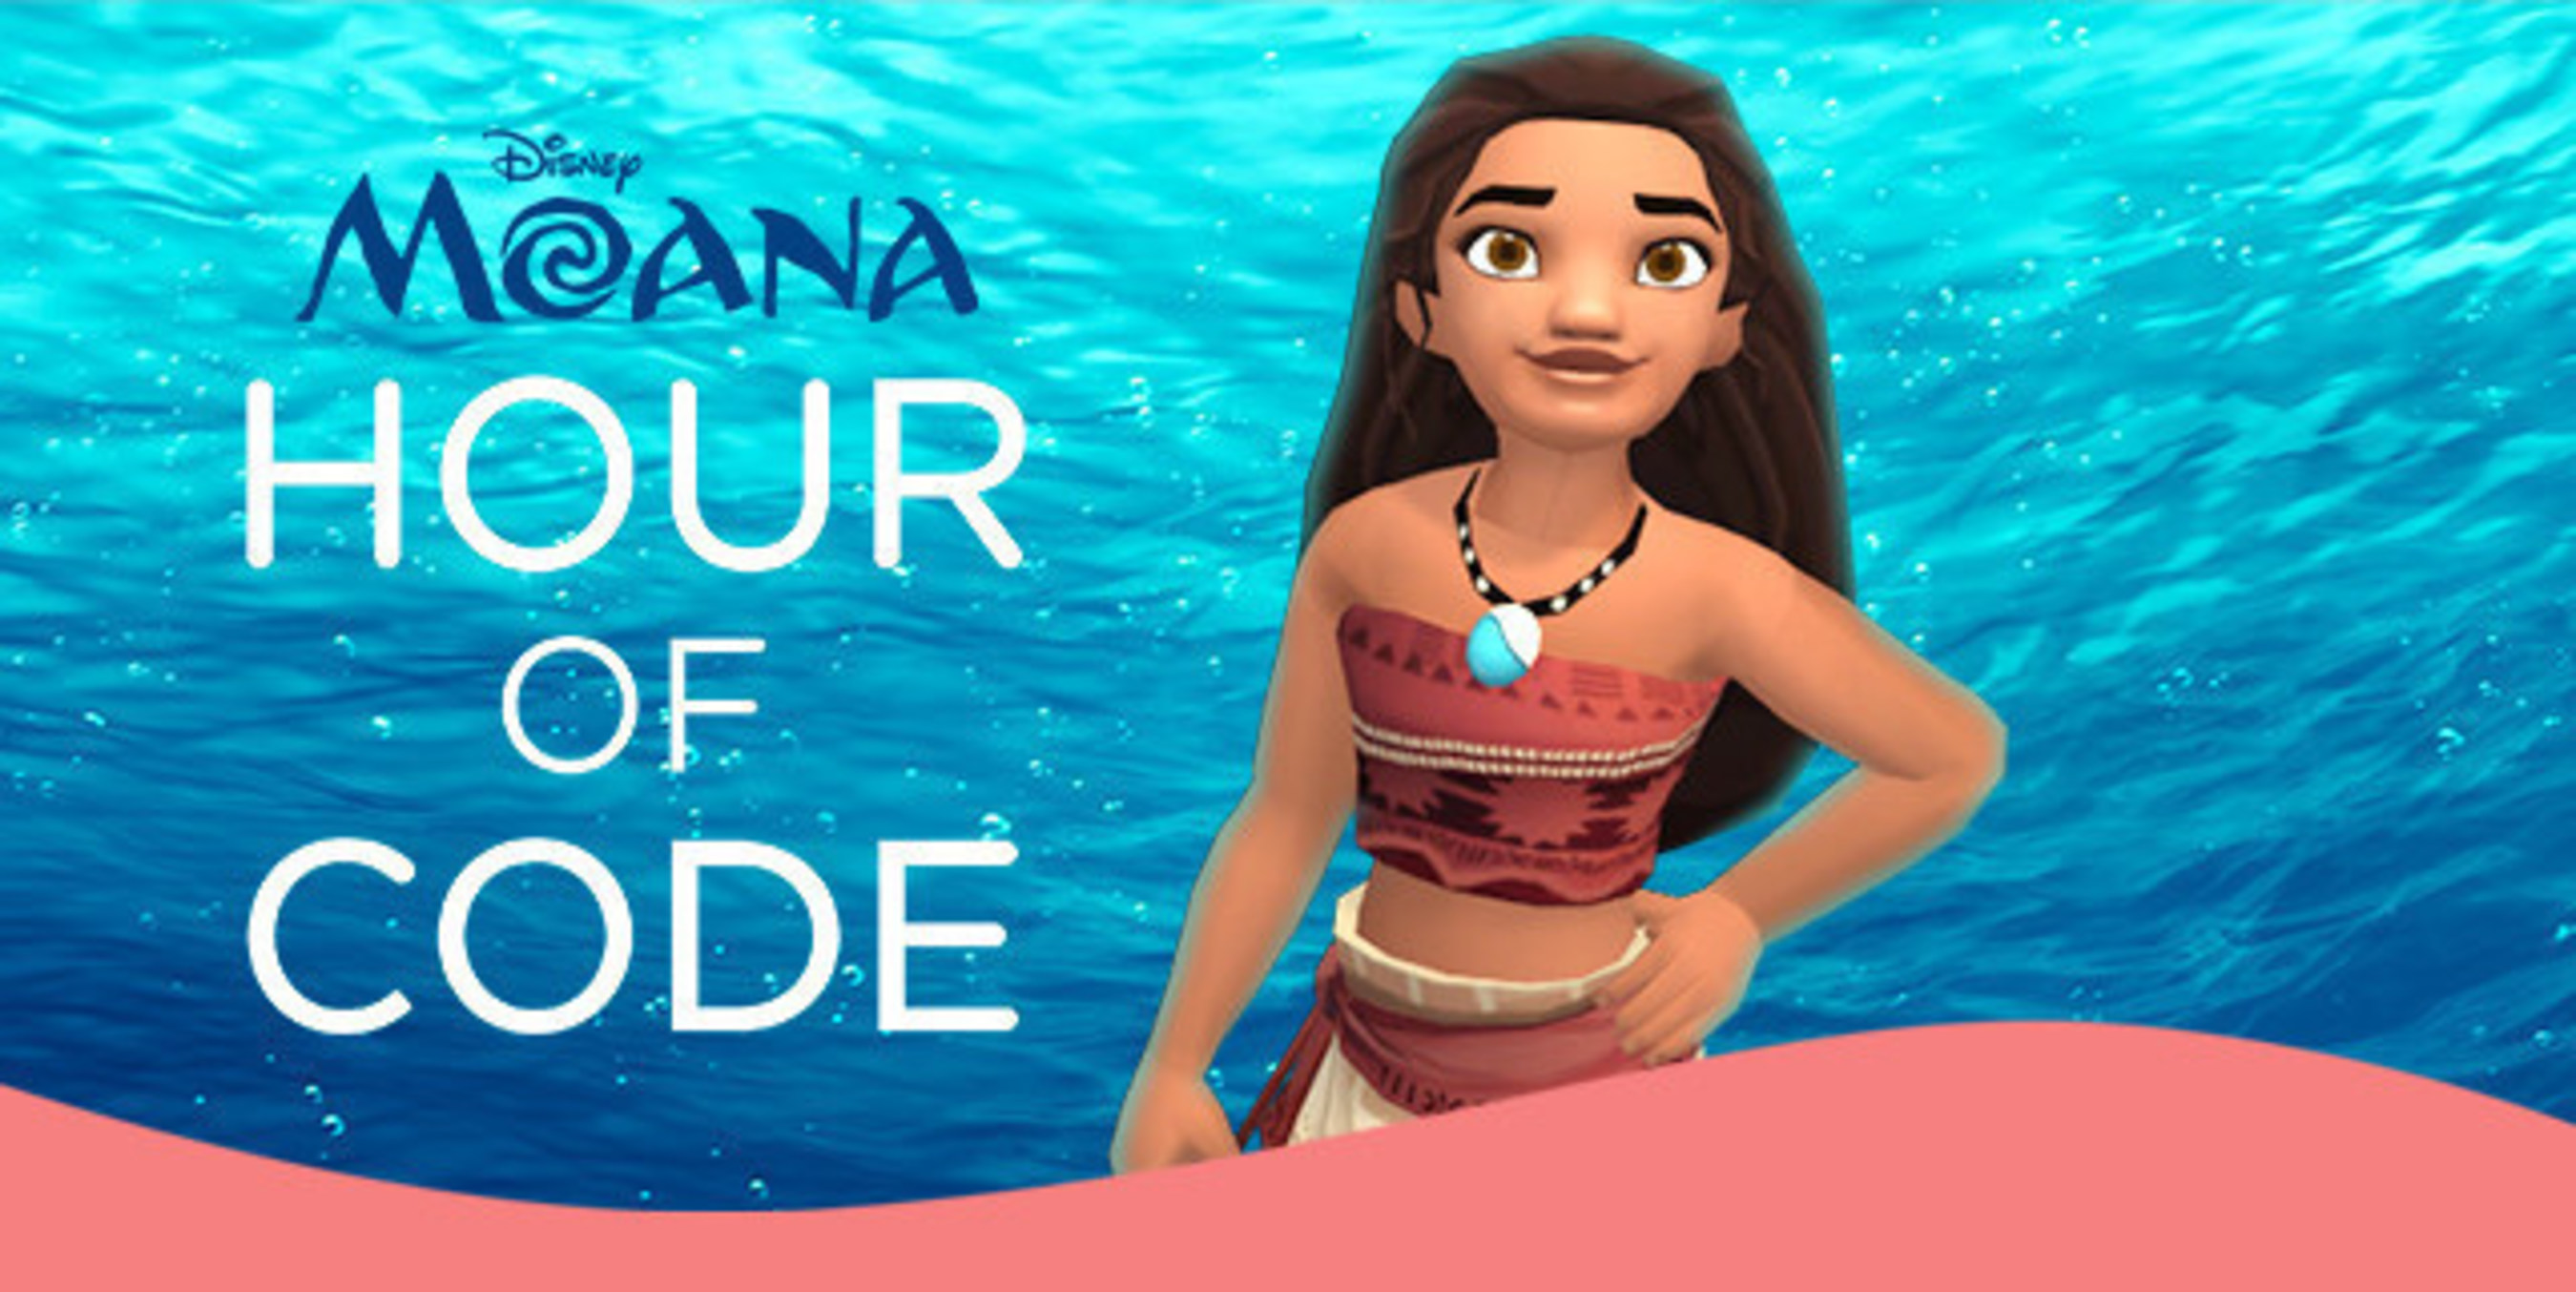 Image result for hour of code moana